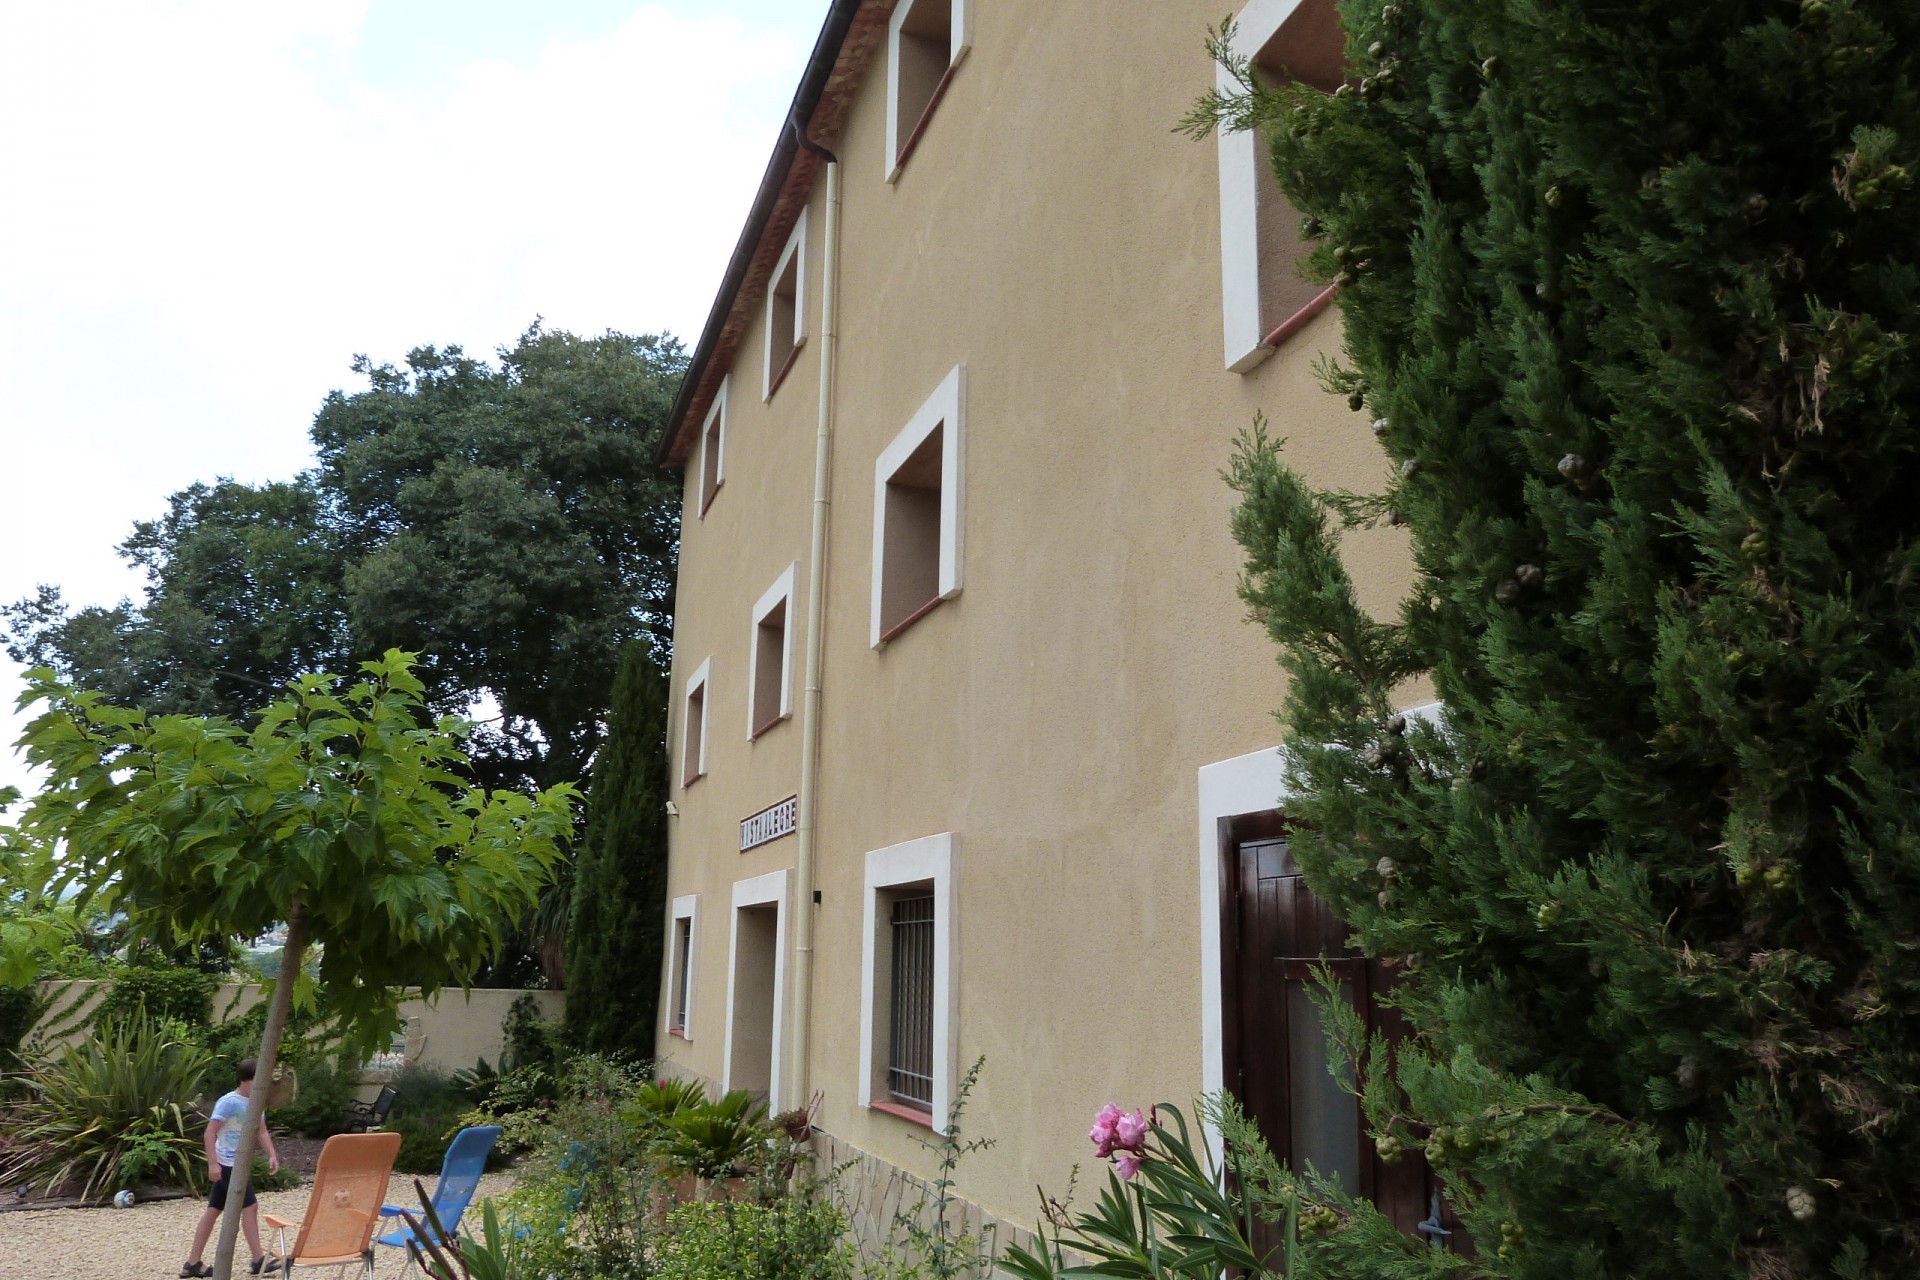 Re-Sale - Country Property - Ibi - Ibi - Country